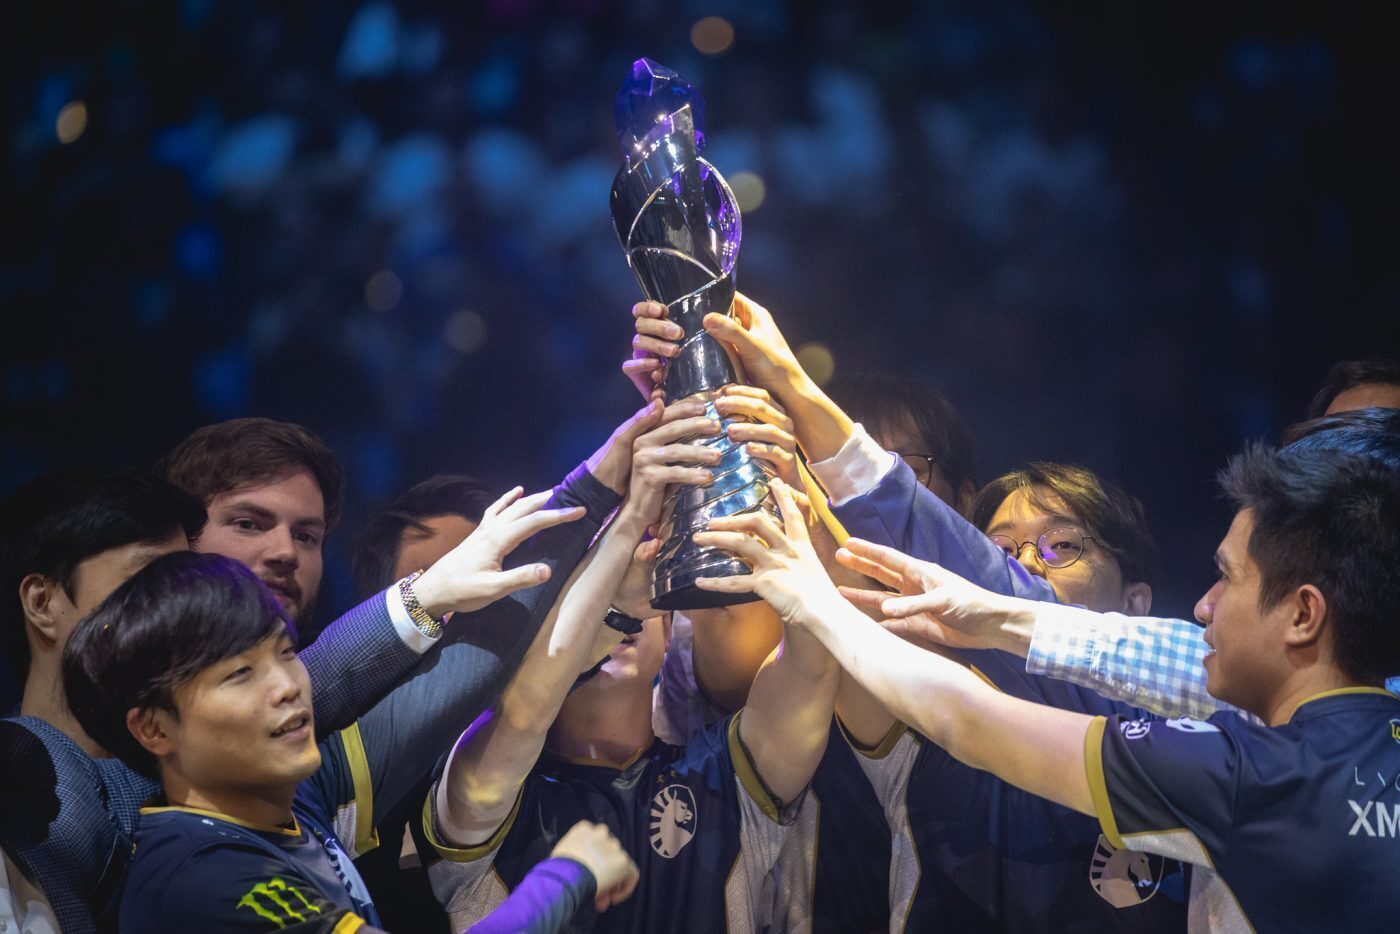 Team Liquid at the LoL Legends Championship Series Spring Finals at Chaifetz Arena on April 13, 2019 in Saint Louis, Missouri. (Photo by Colin Young-Wolff/Riot Games)